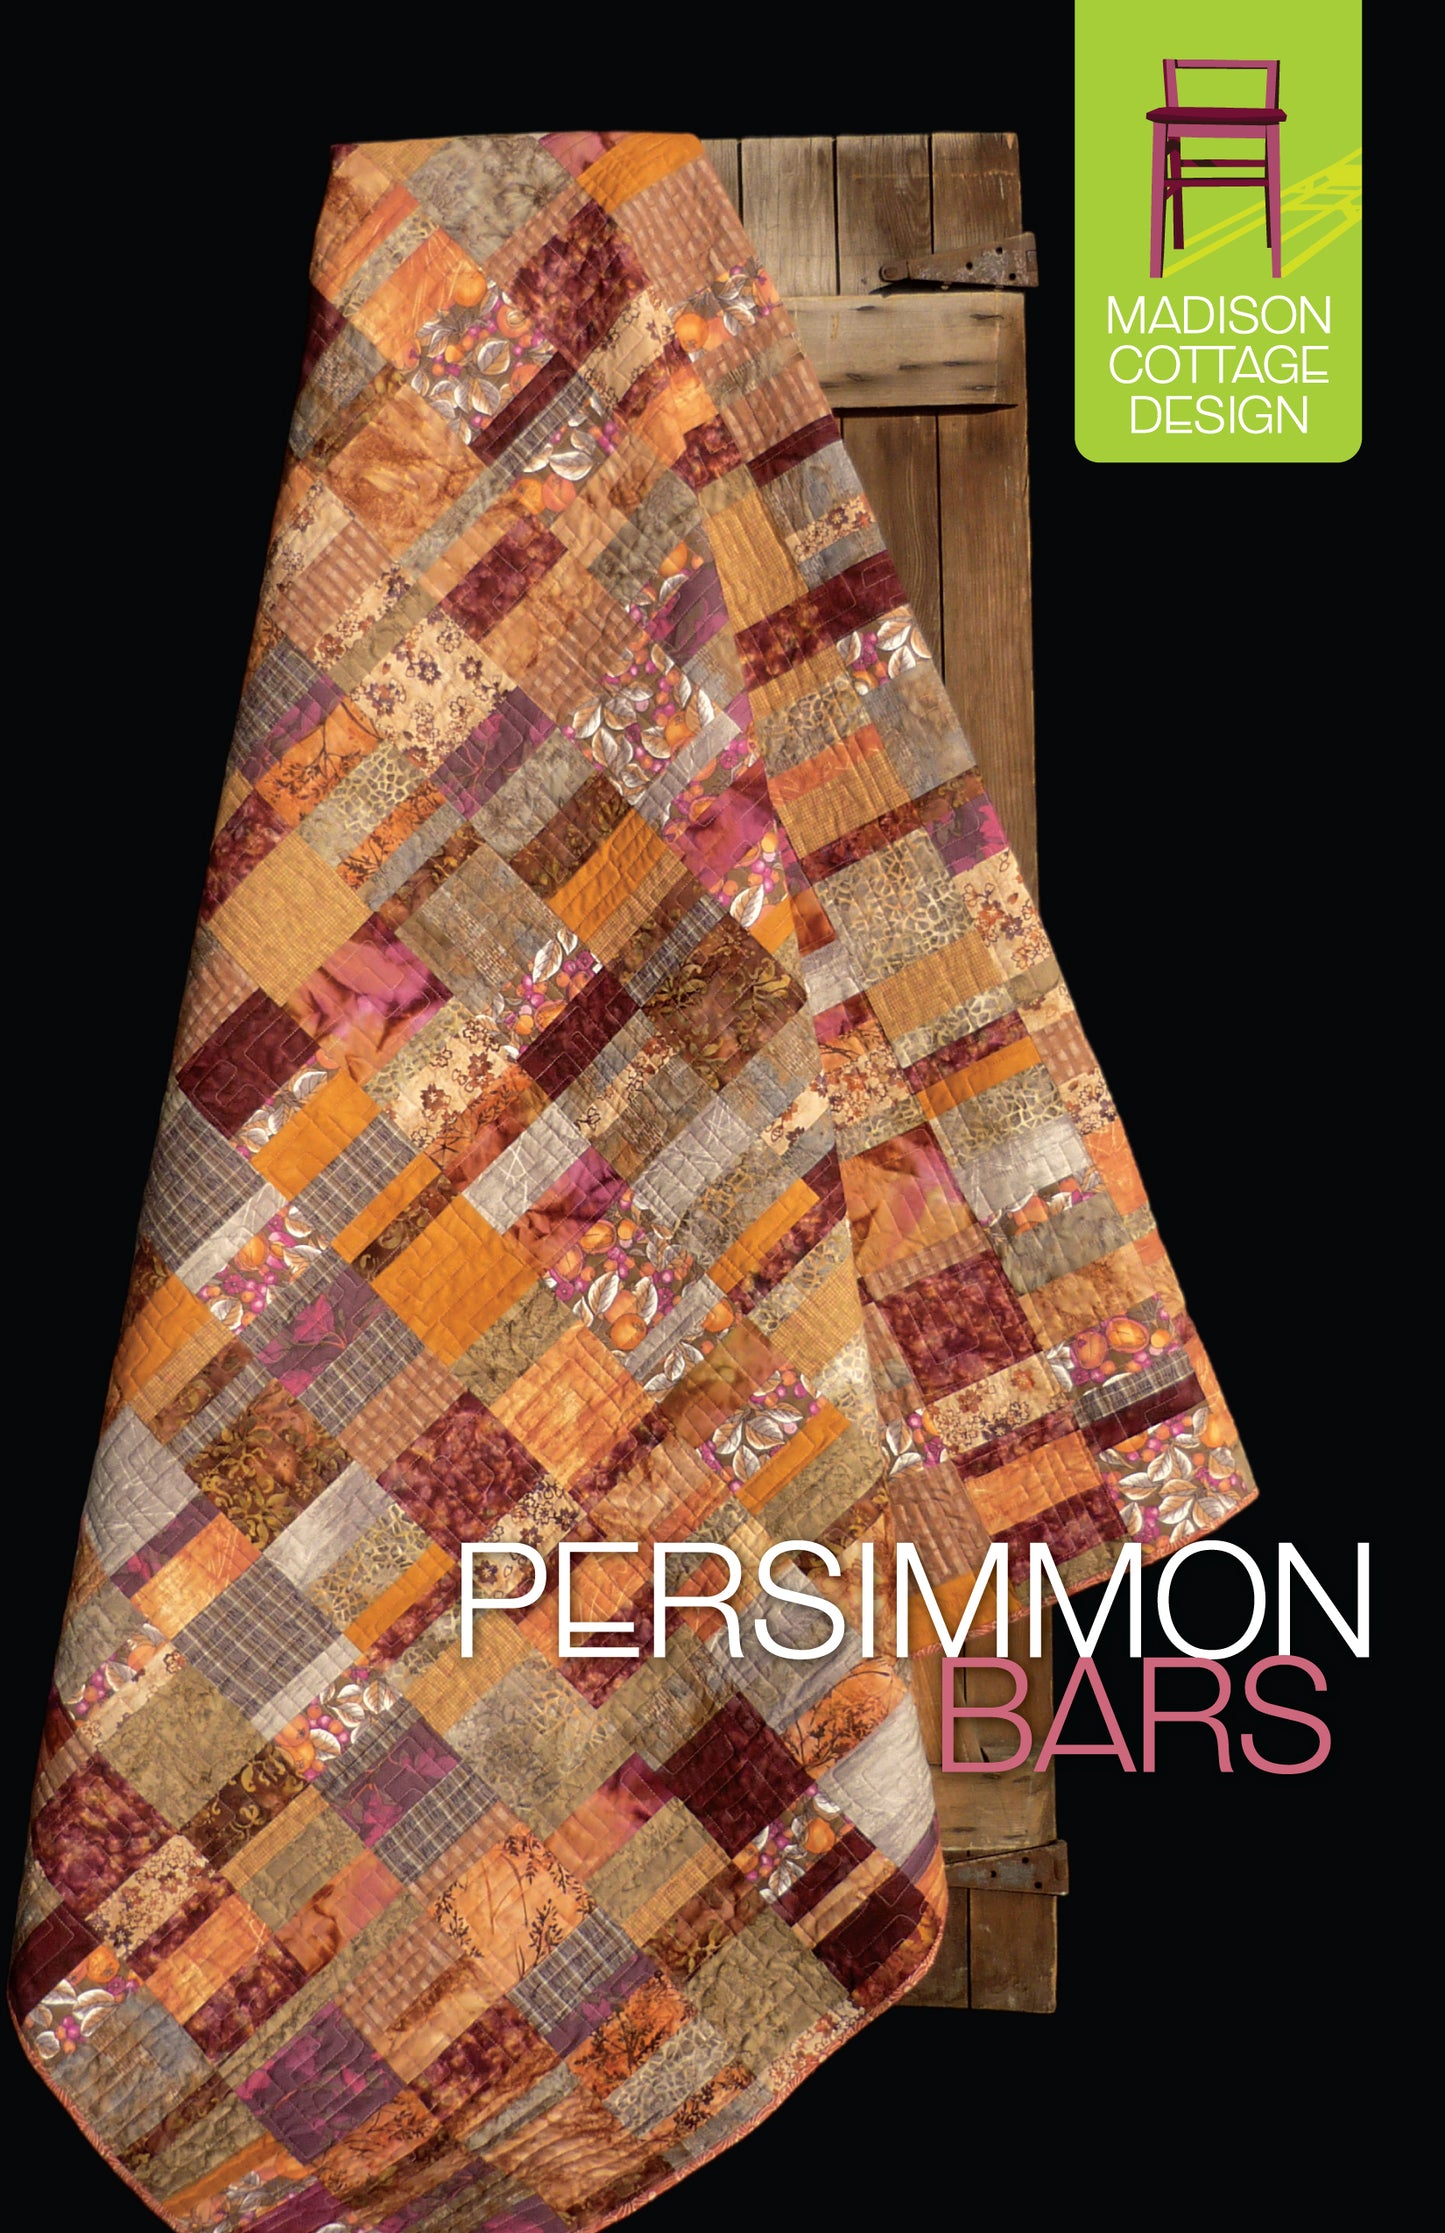 Persimmon Bars Quilt Pattern by Madison Cottage Design